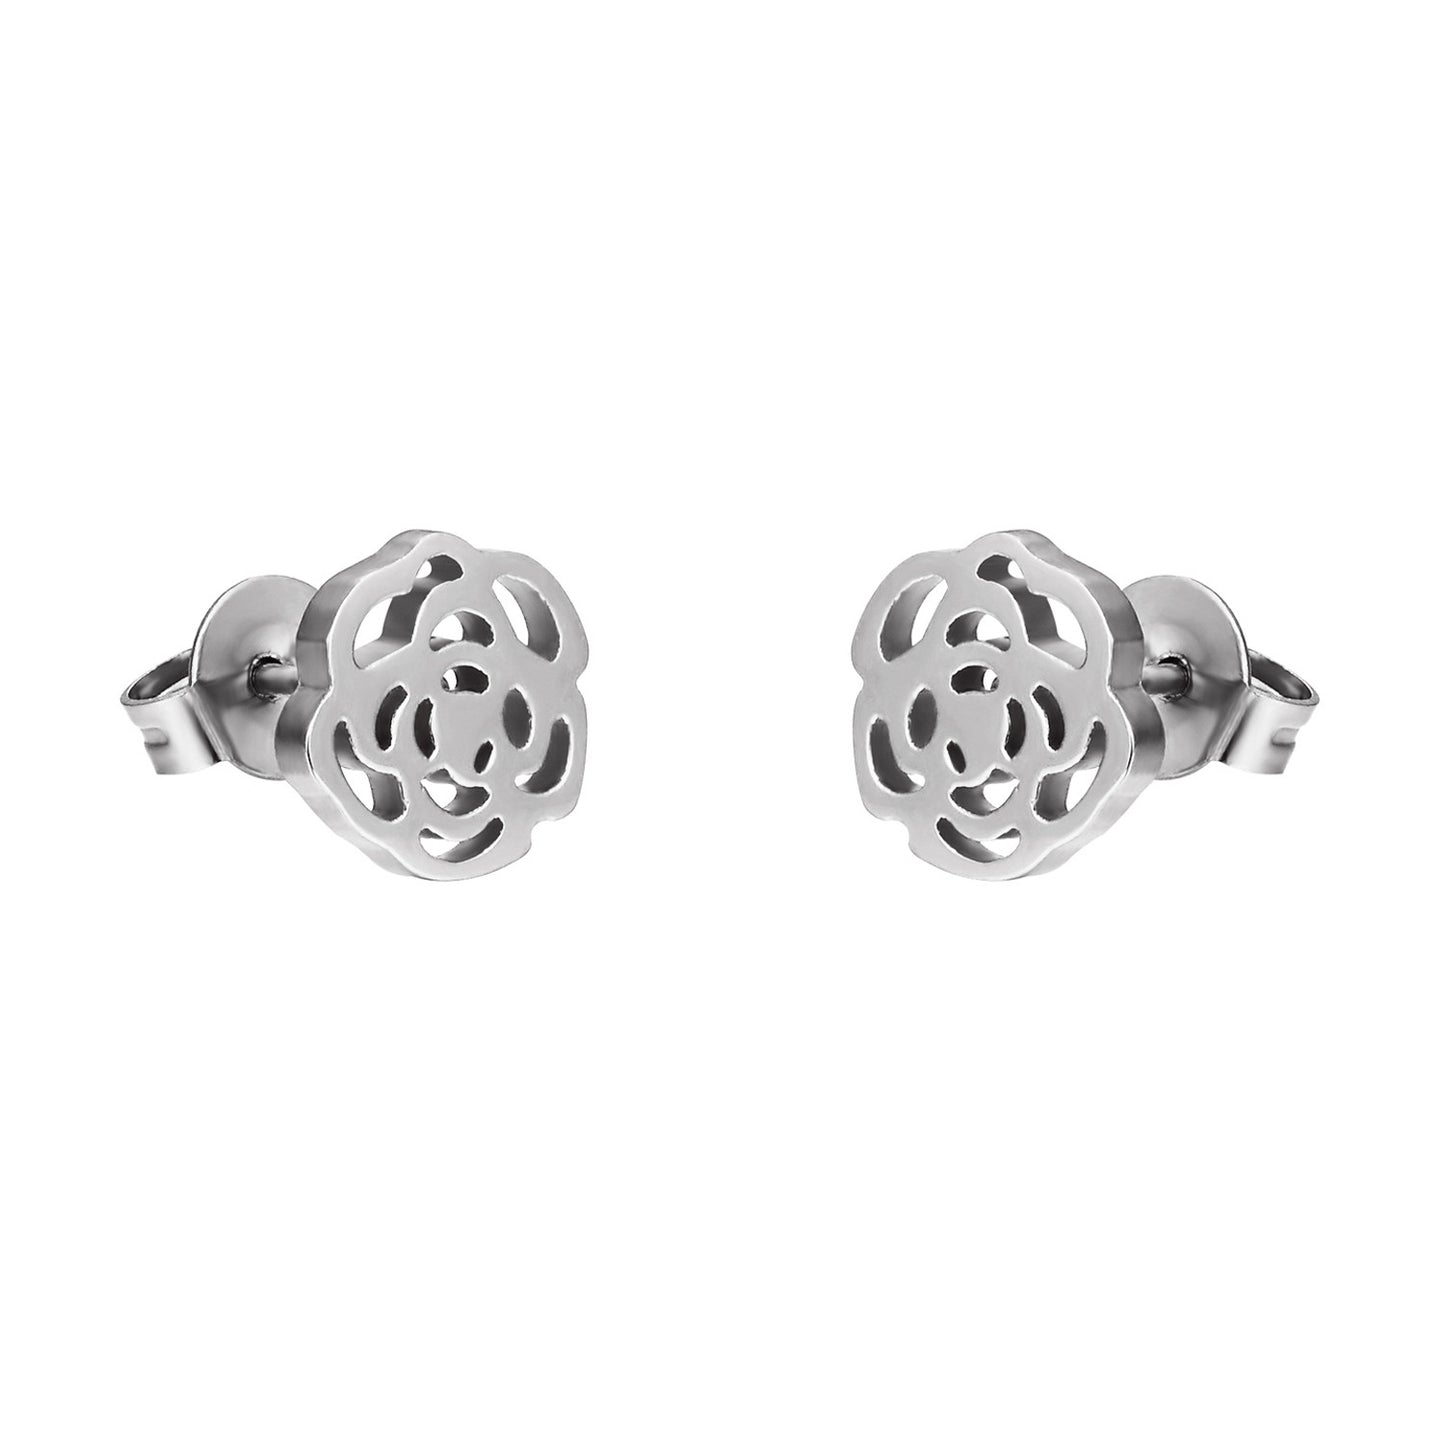 Rose Flower Earrings Stainless Steel Womens Studs Unique Gorgeous Design 8mm